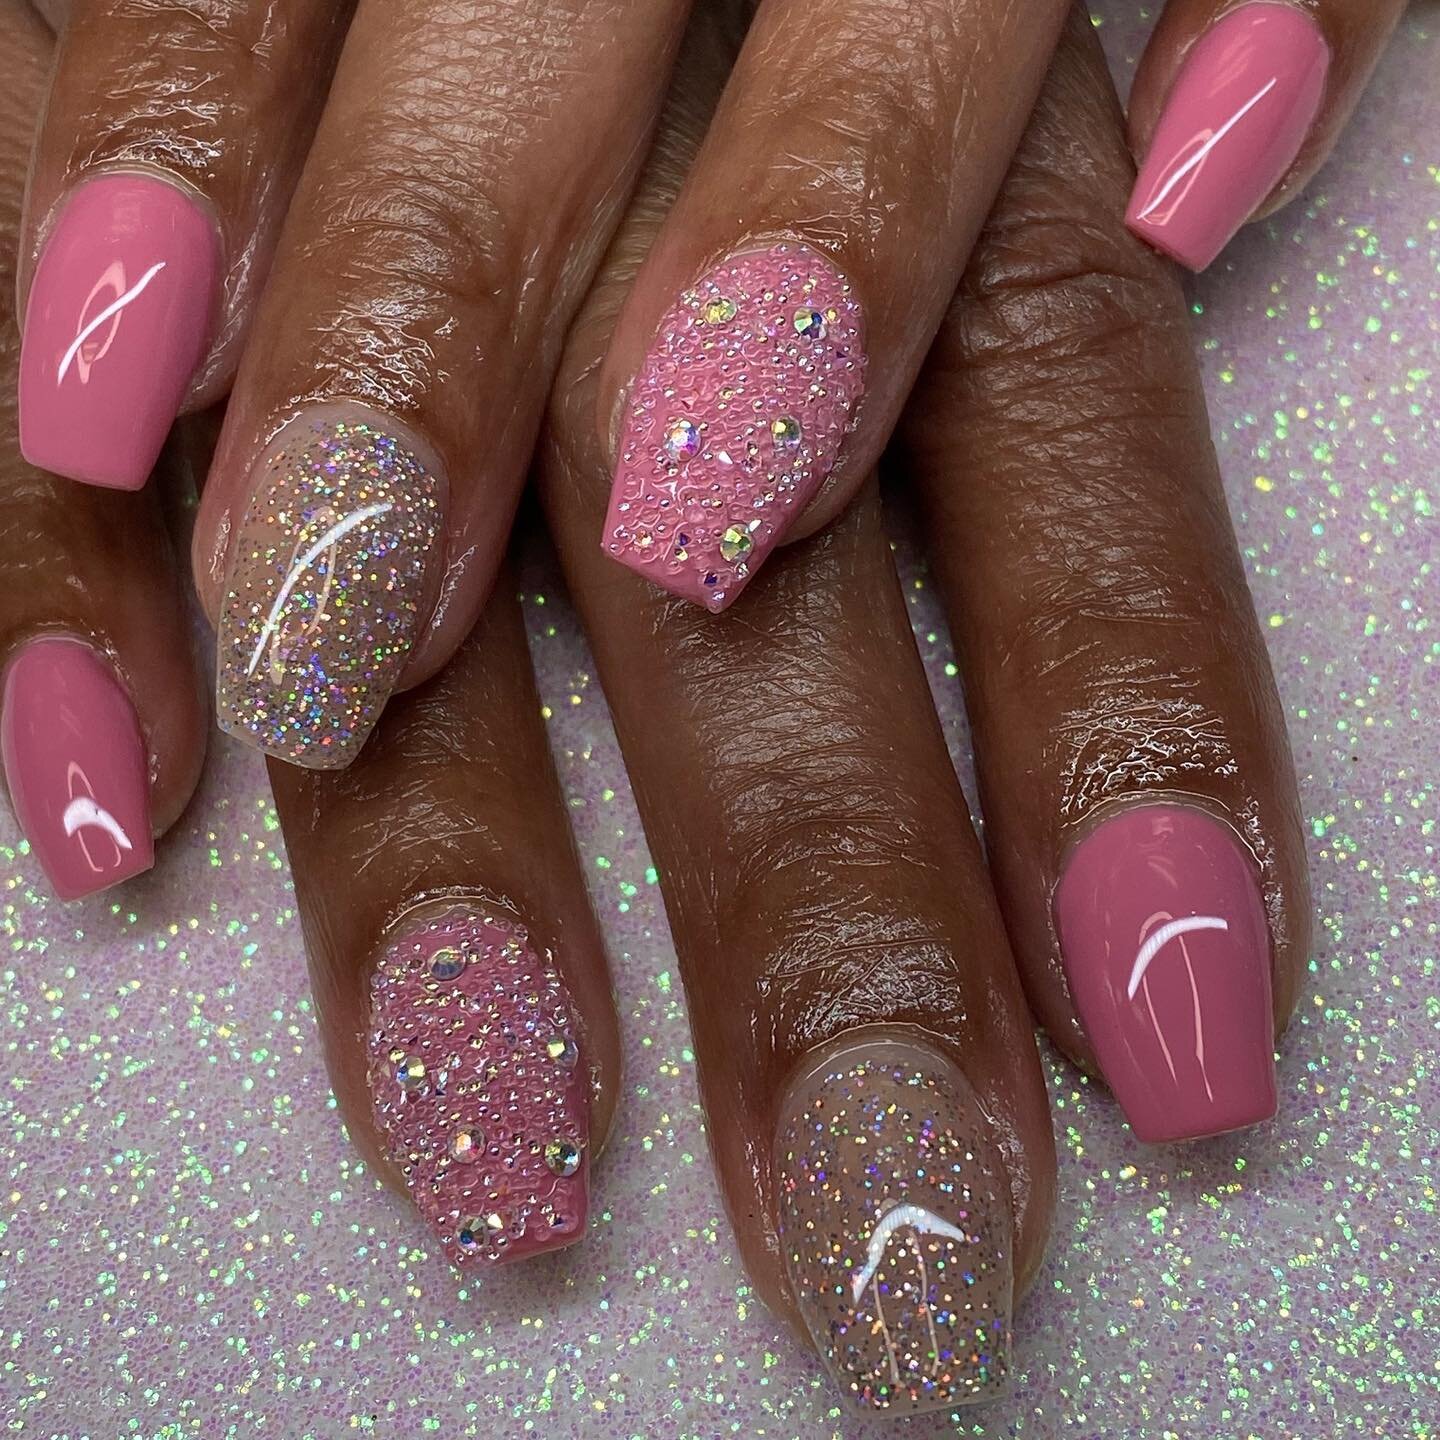 https://sivaboutiqueandnailbar.as.me/ #coffinnails #swarovskinails #blingnails #glitternails #gelpolish #opi #opigelcolor #nailsoftoday #nailart #pamperyourself #appointmentsavailable #appointmentsonly #supportlocal #supportsmallbusiness #homewood #h